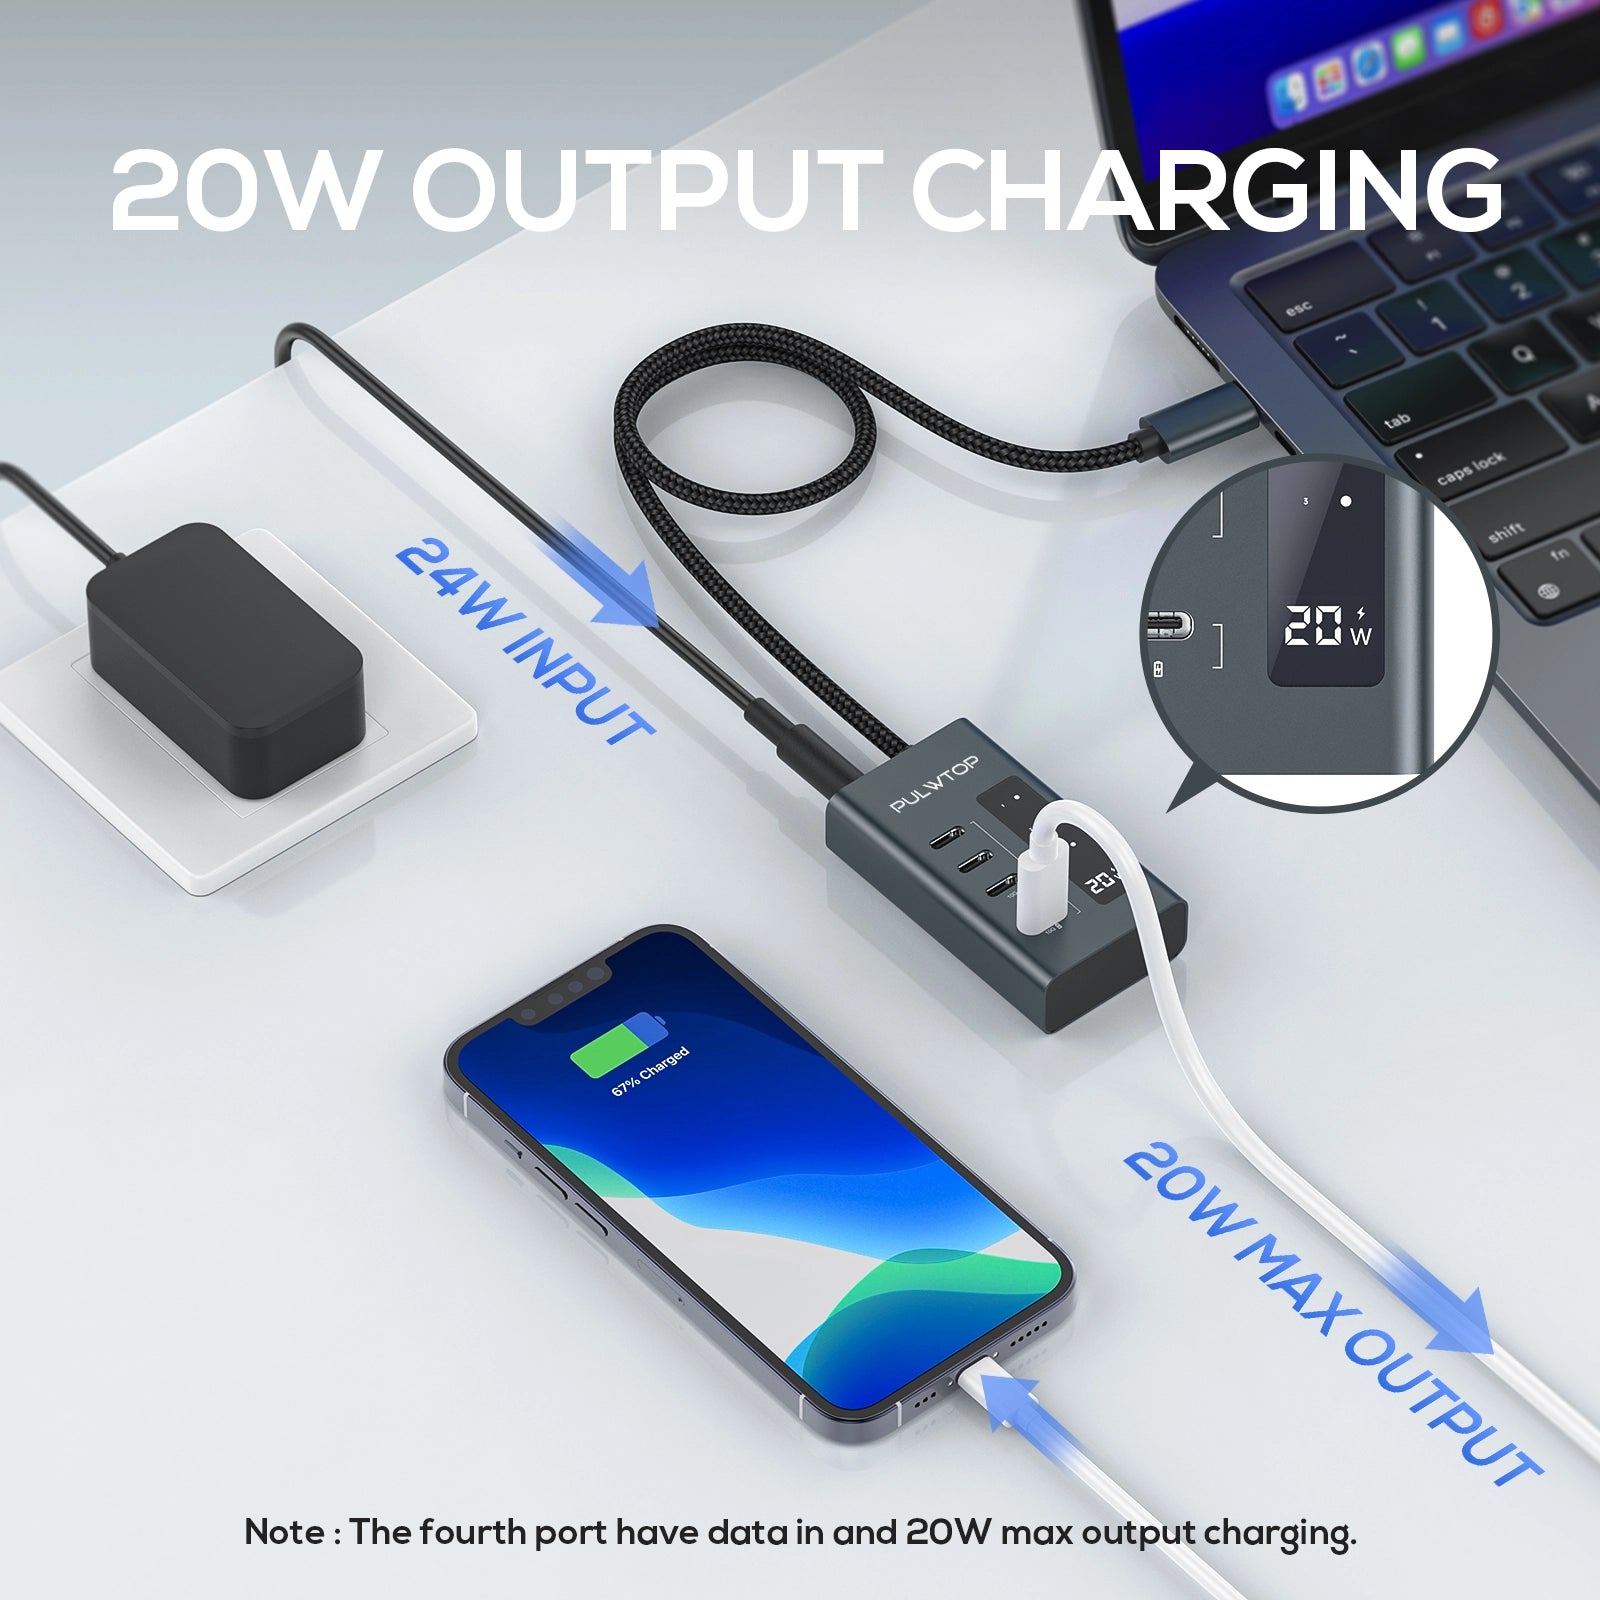 PULWTOP USB C Hub for Laptops, 4-in-1 10Gbps USB C supports data and charging (not video), works with iMac, MacBook Pro/Air, iPad, XPS